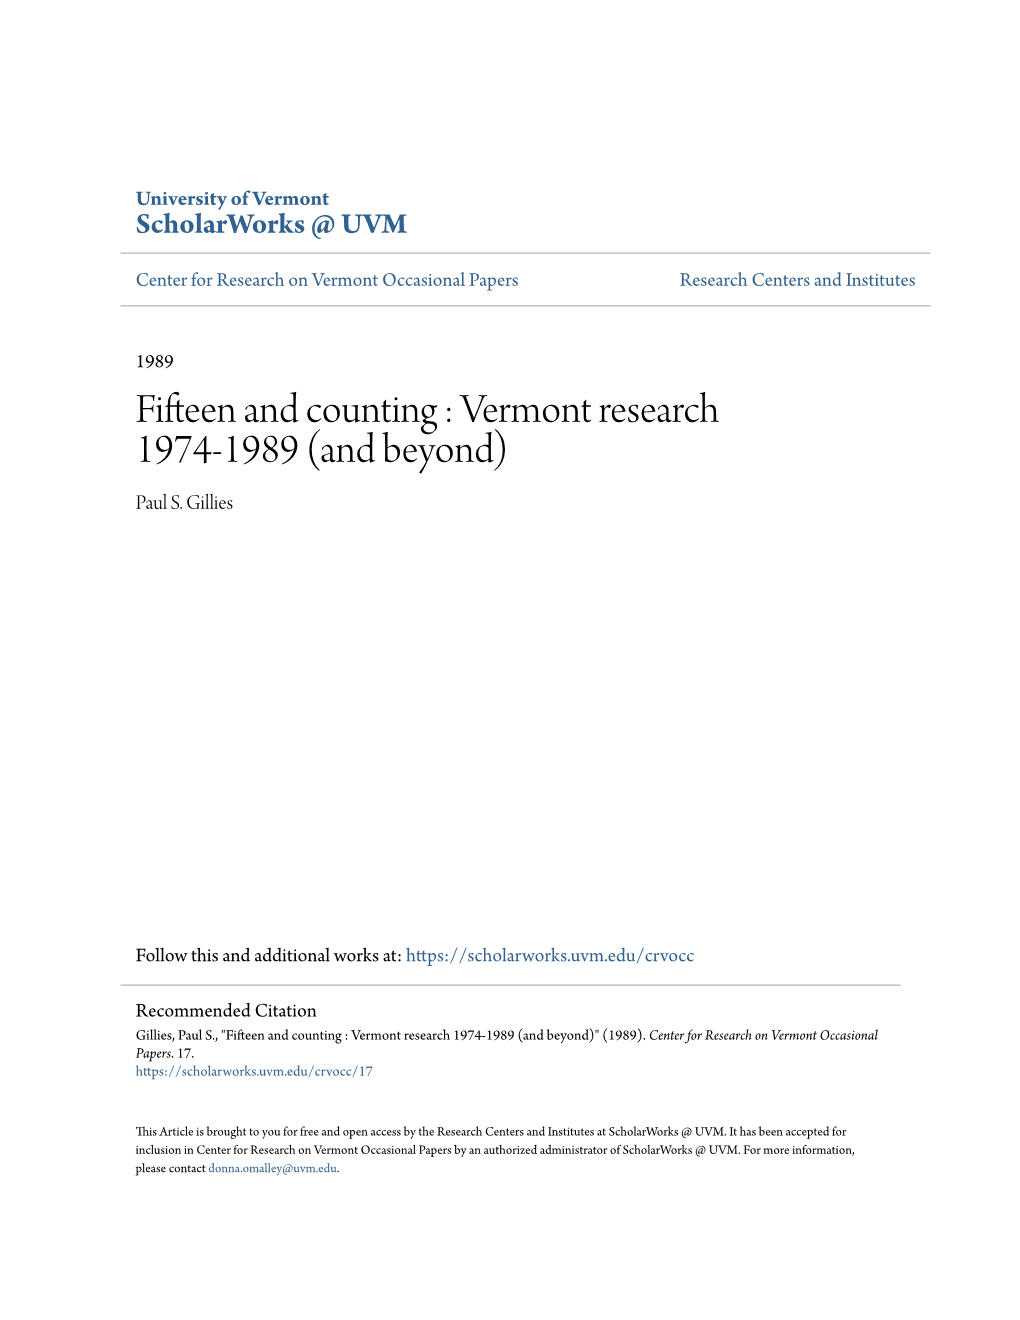 Fifteen and Counting : Vermont Research 1974-1989 (And Beyond) Paul S